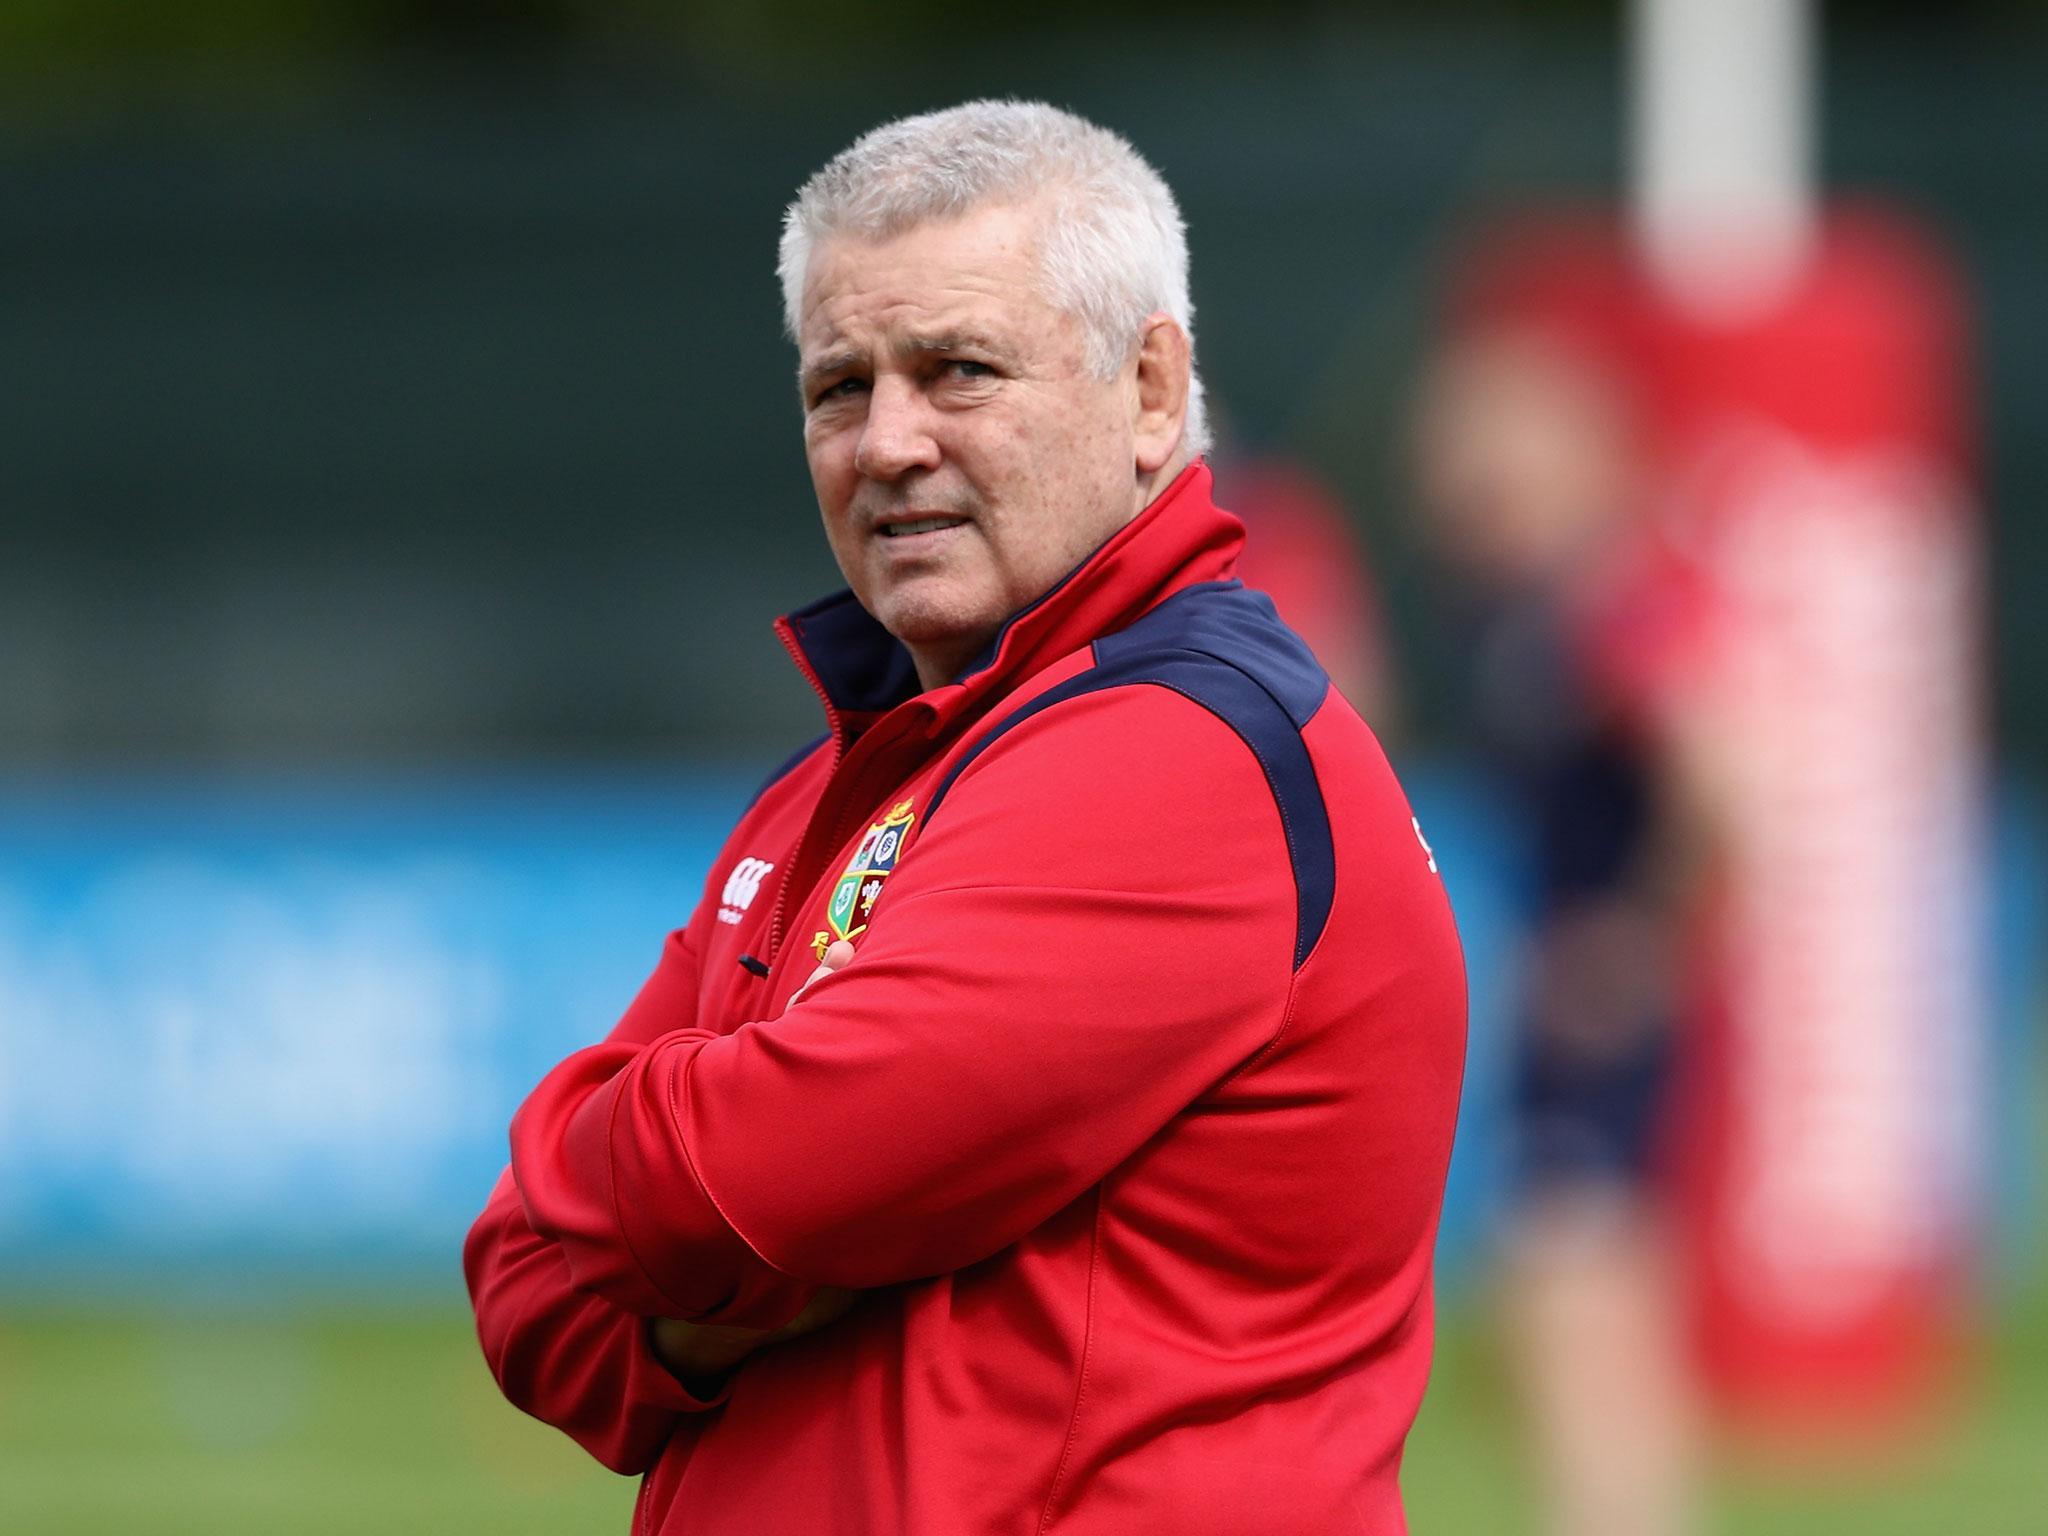 Warren Gatland knows the Lions are in for a tough test